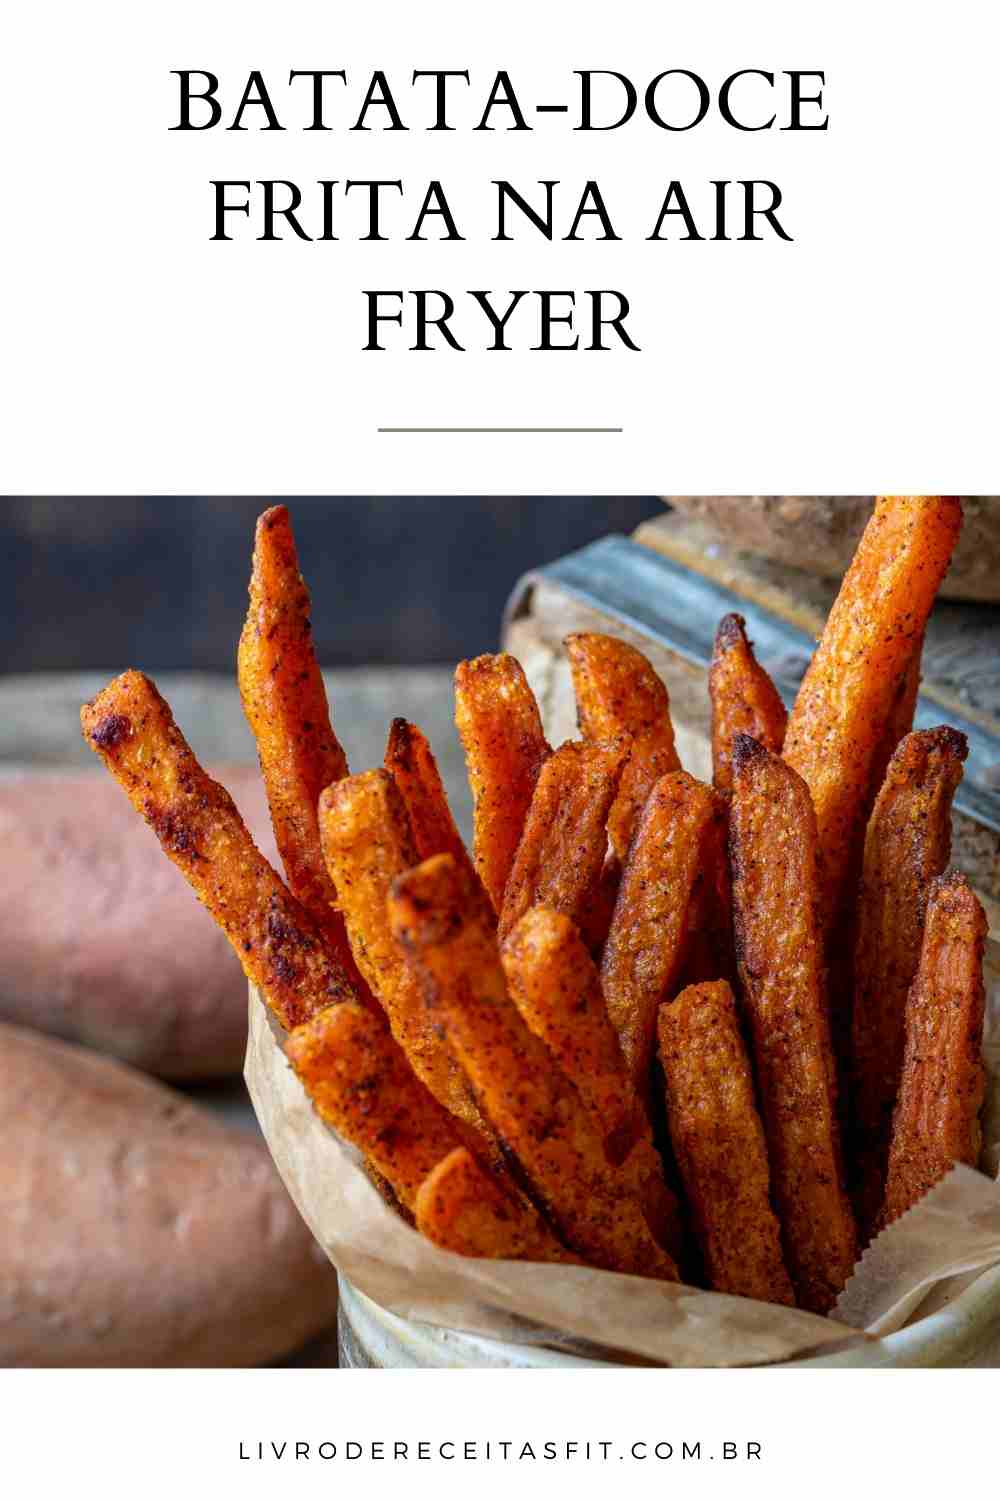 You are currently viewing Batata Doce Frita na AirFryer